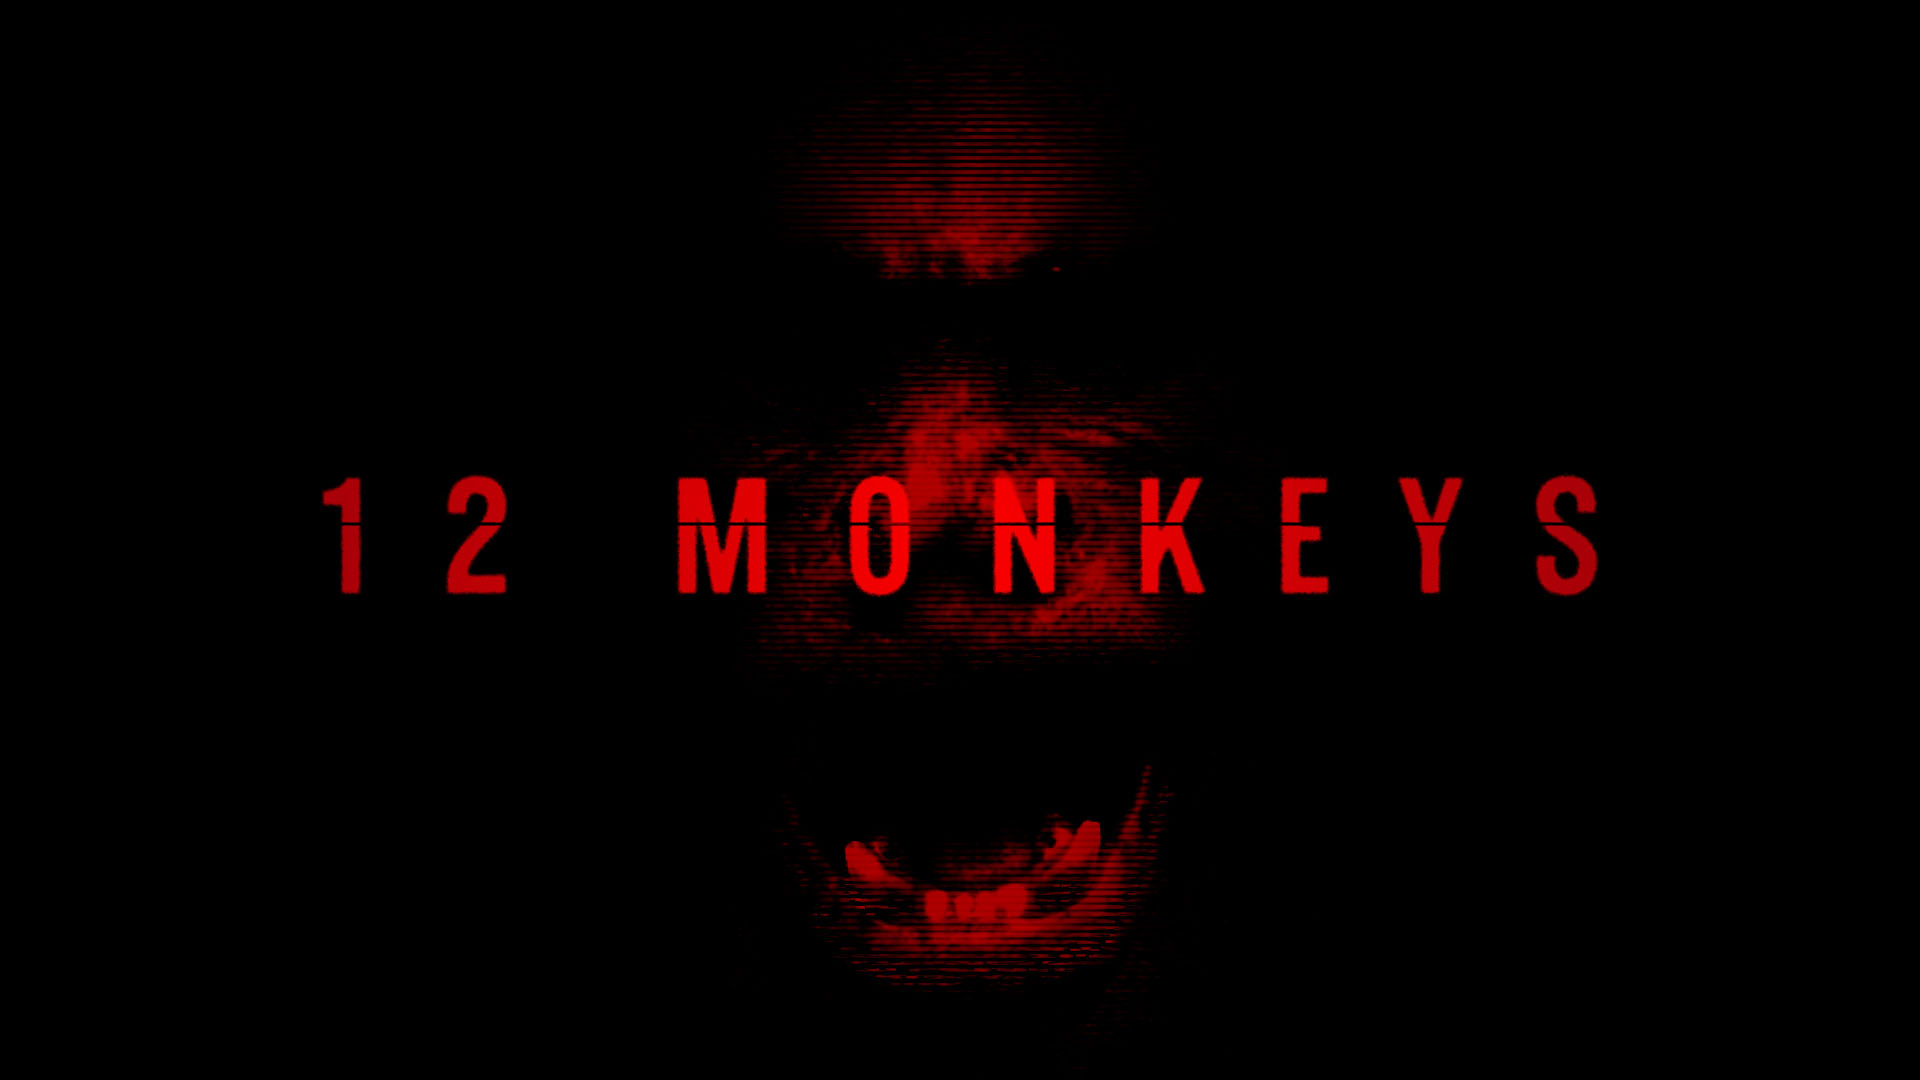 42-facts-about-the-movie-12-monkeys